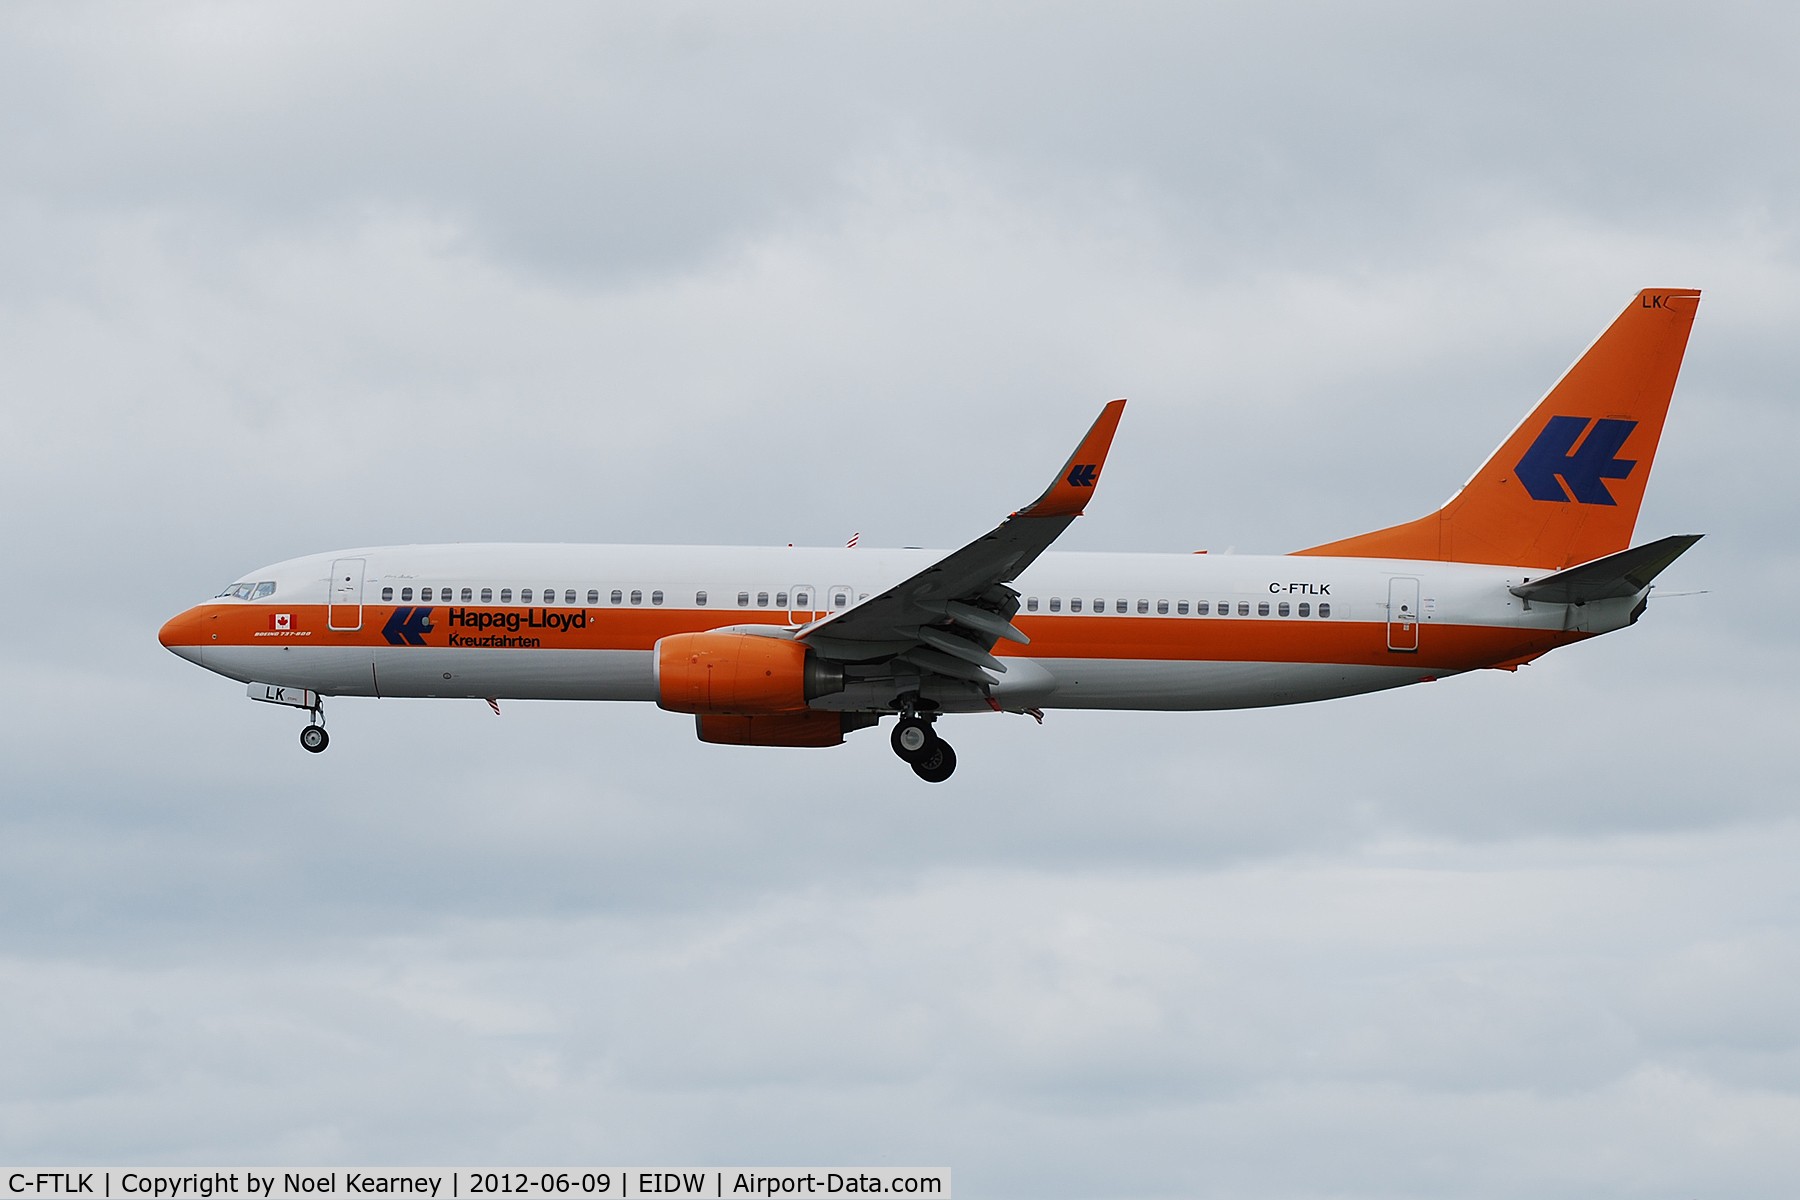 C-FTLK, 2008 Boeing 737-8K5 C/N 35143, Landing at EIDW in the retro clrs of HAPAG LLOYD. (On lease to TOM)